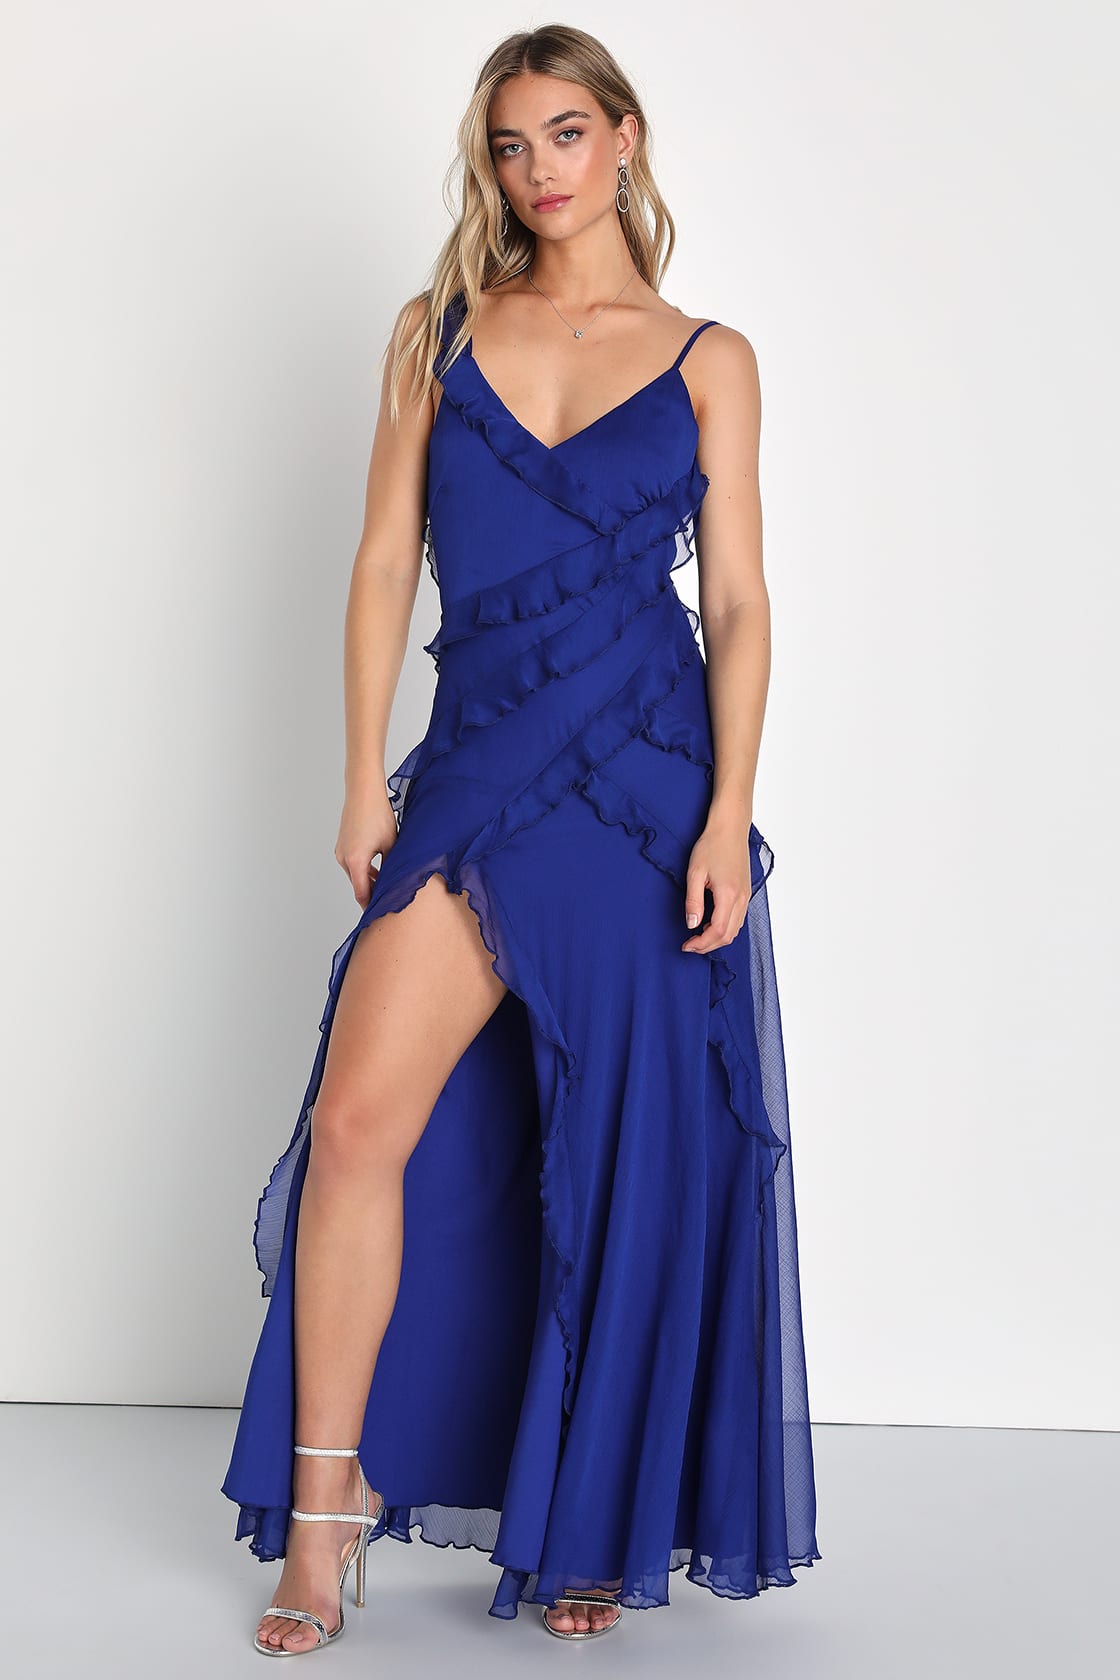 Tier Desire Cobalt Blue Tiered Ruffled Lace-Up Maxi Dress